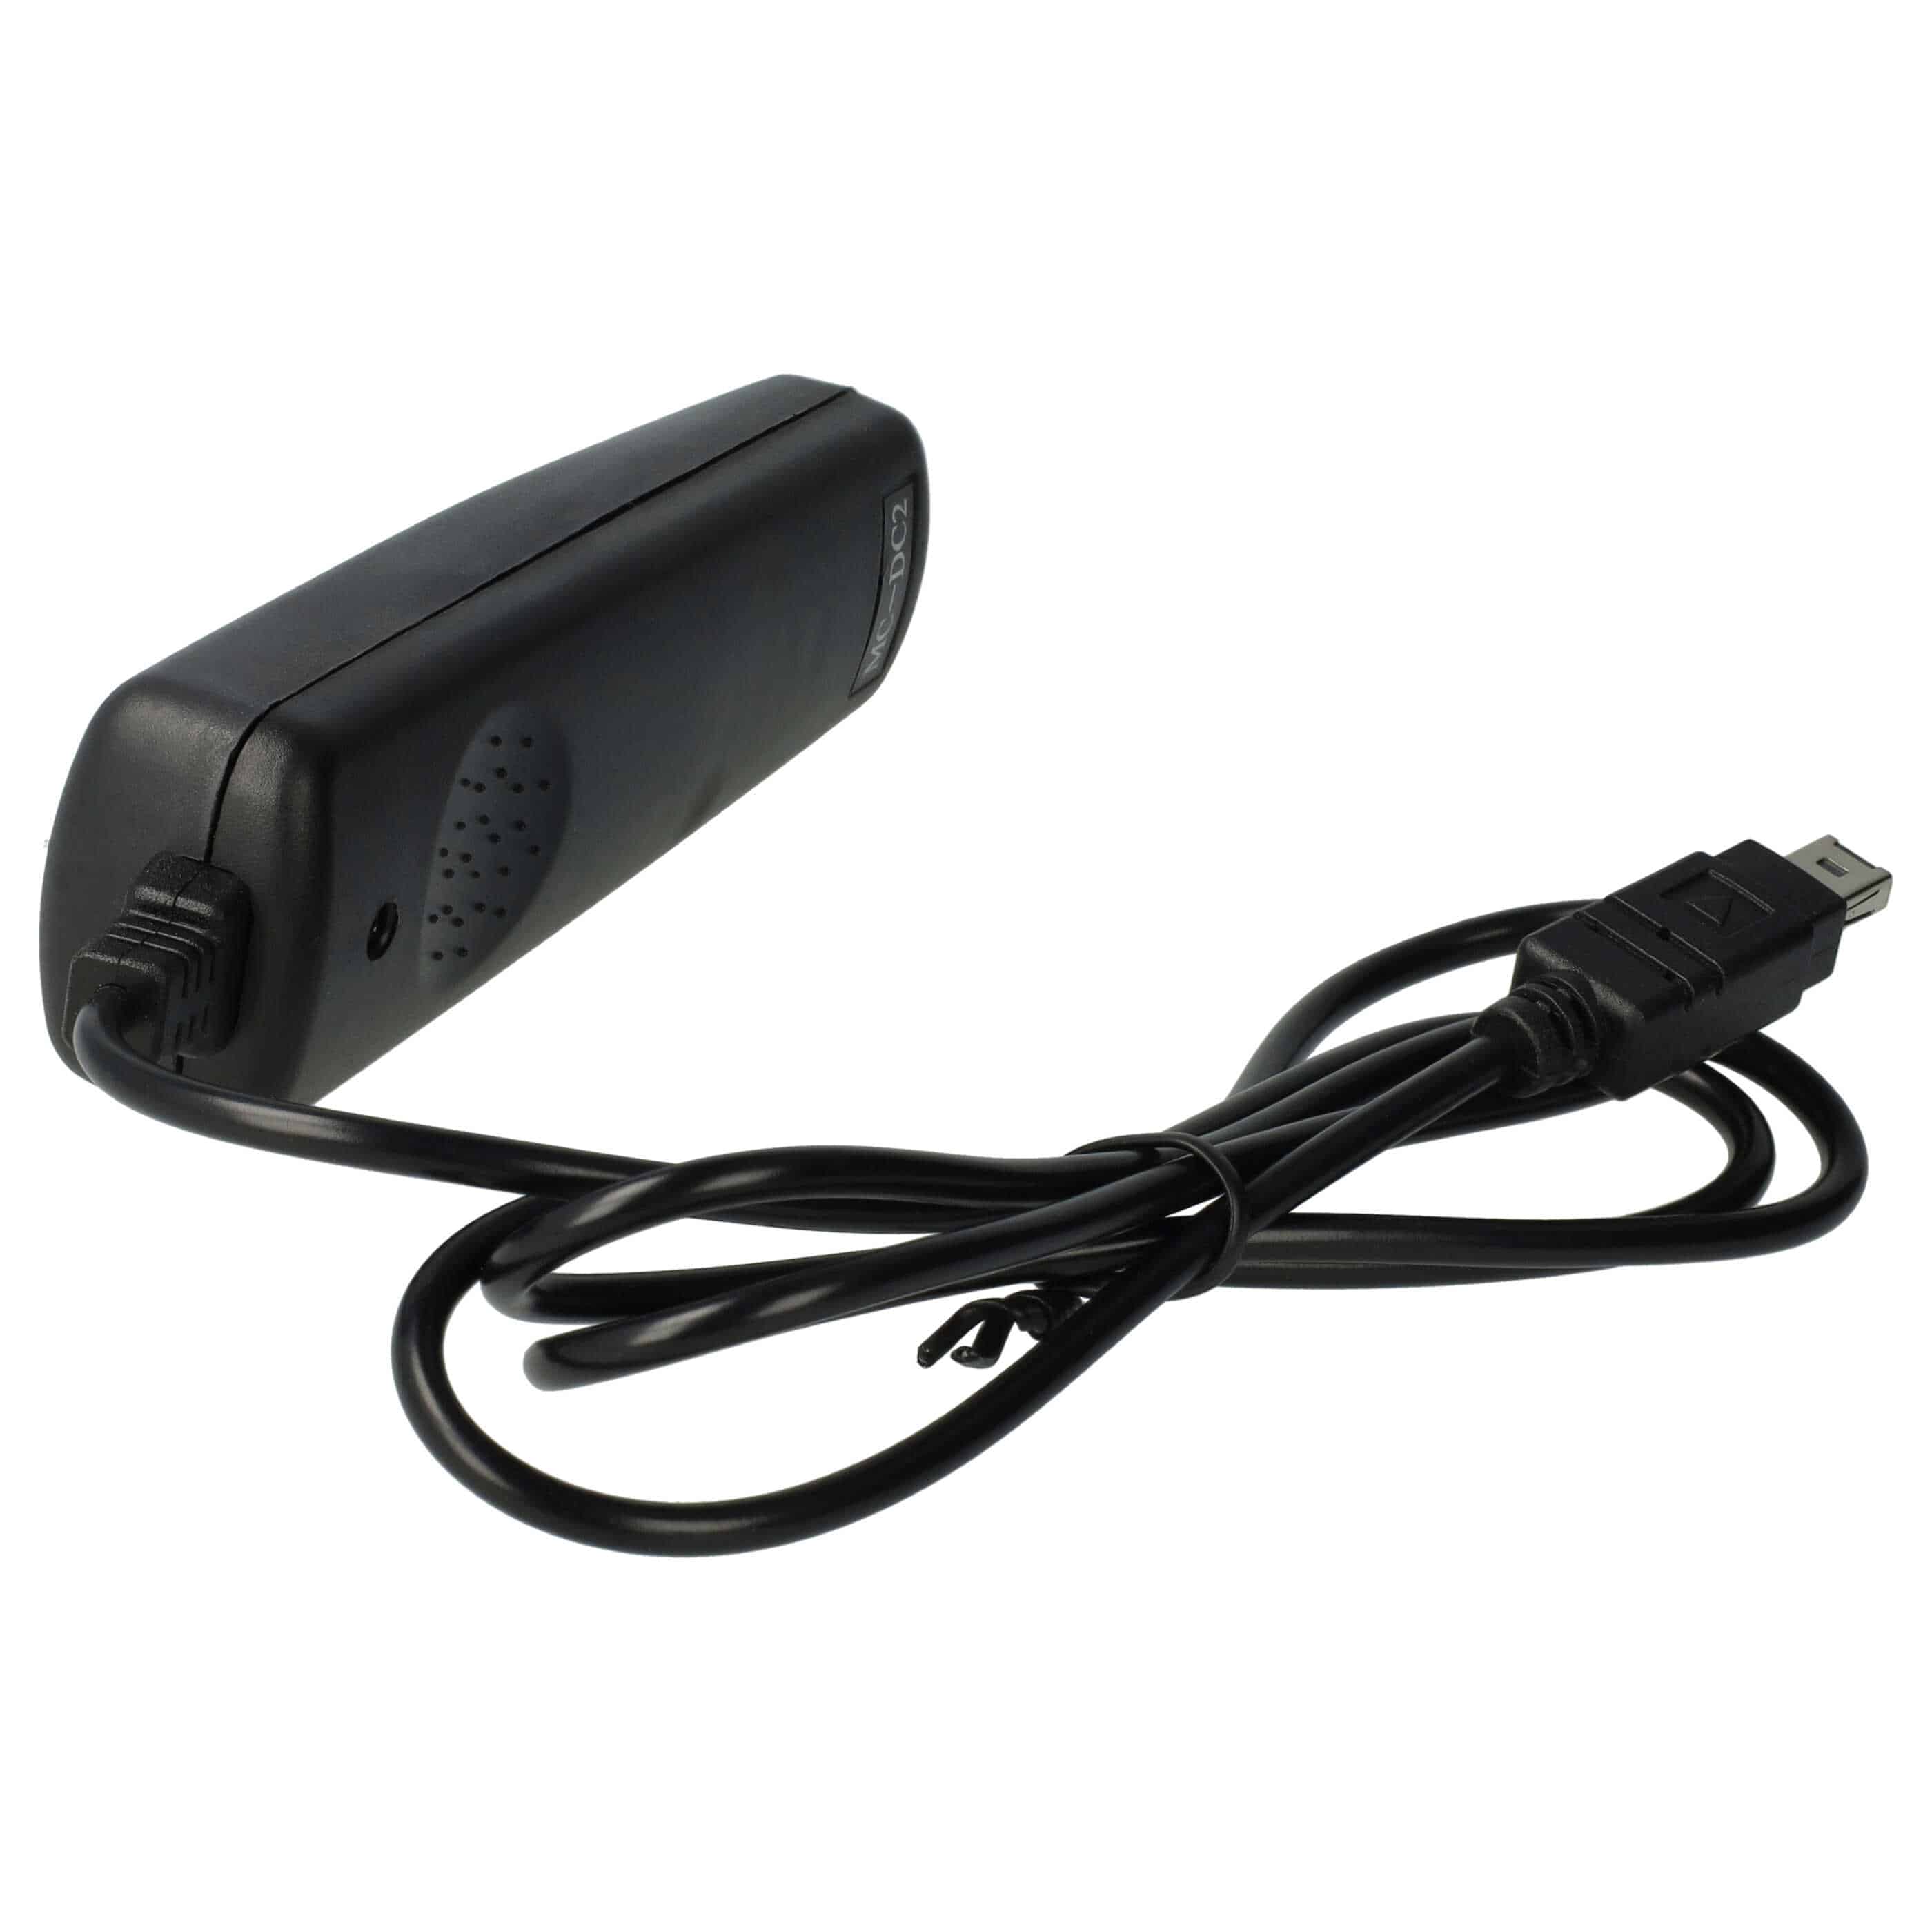 Remote Trigger as Exchange for Nikon MC-DC2 for Camera 2-Step Shutter, 1 m Lead